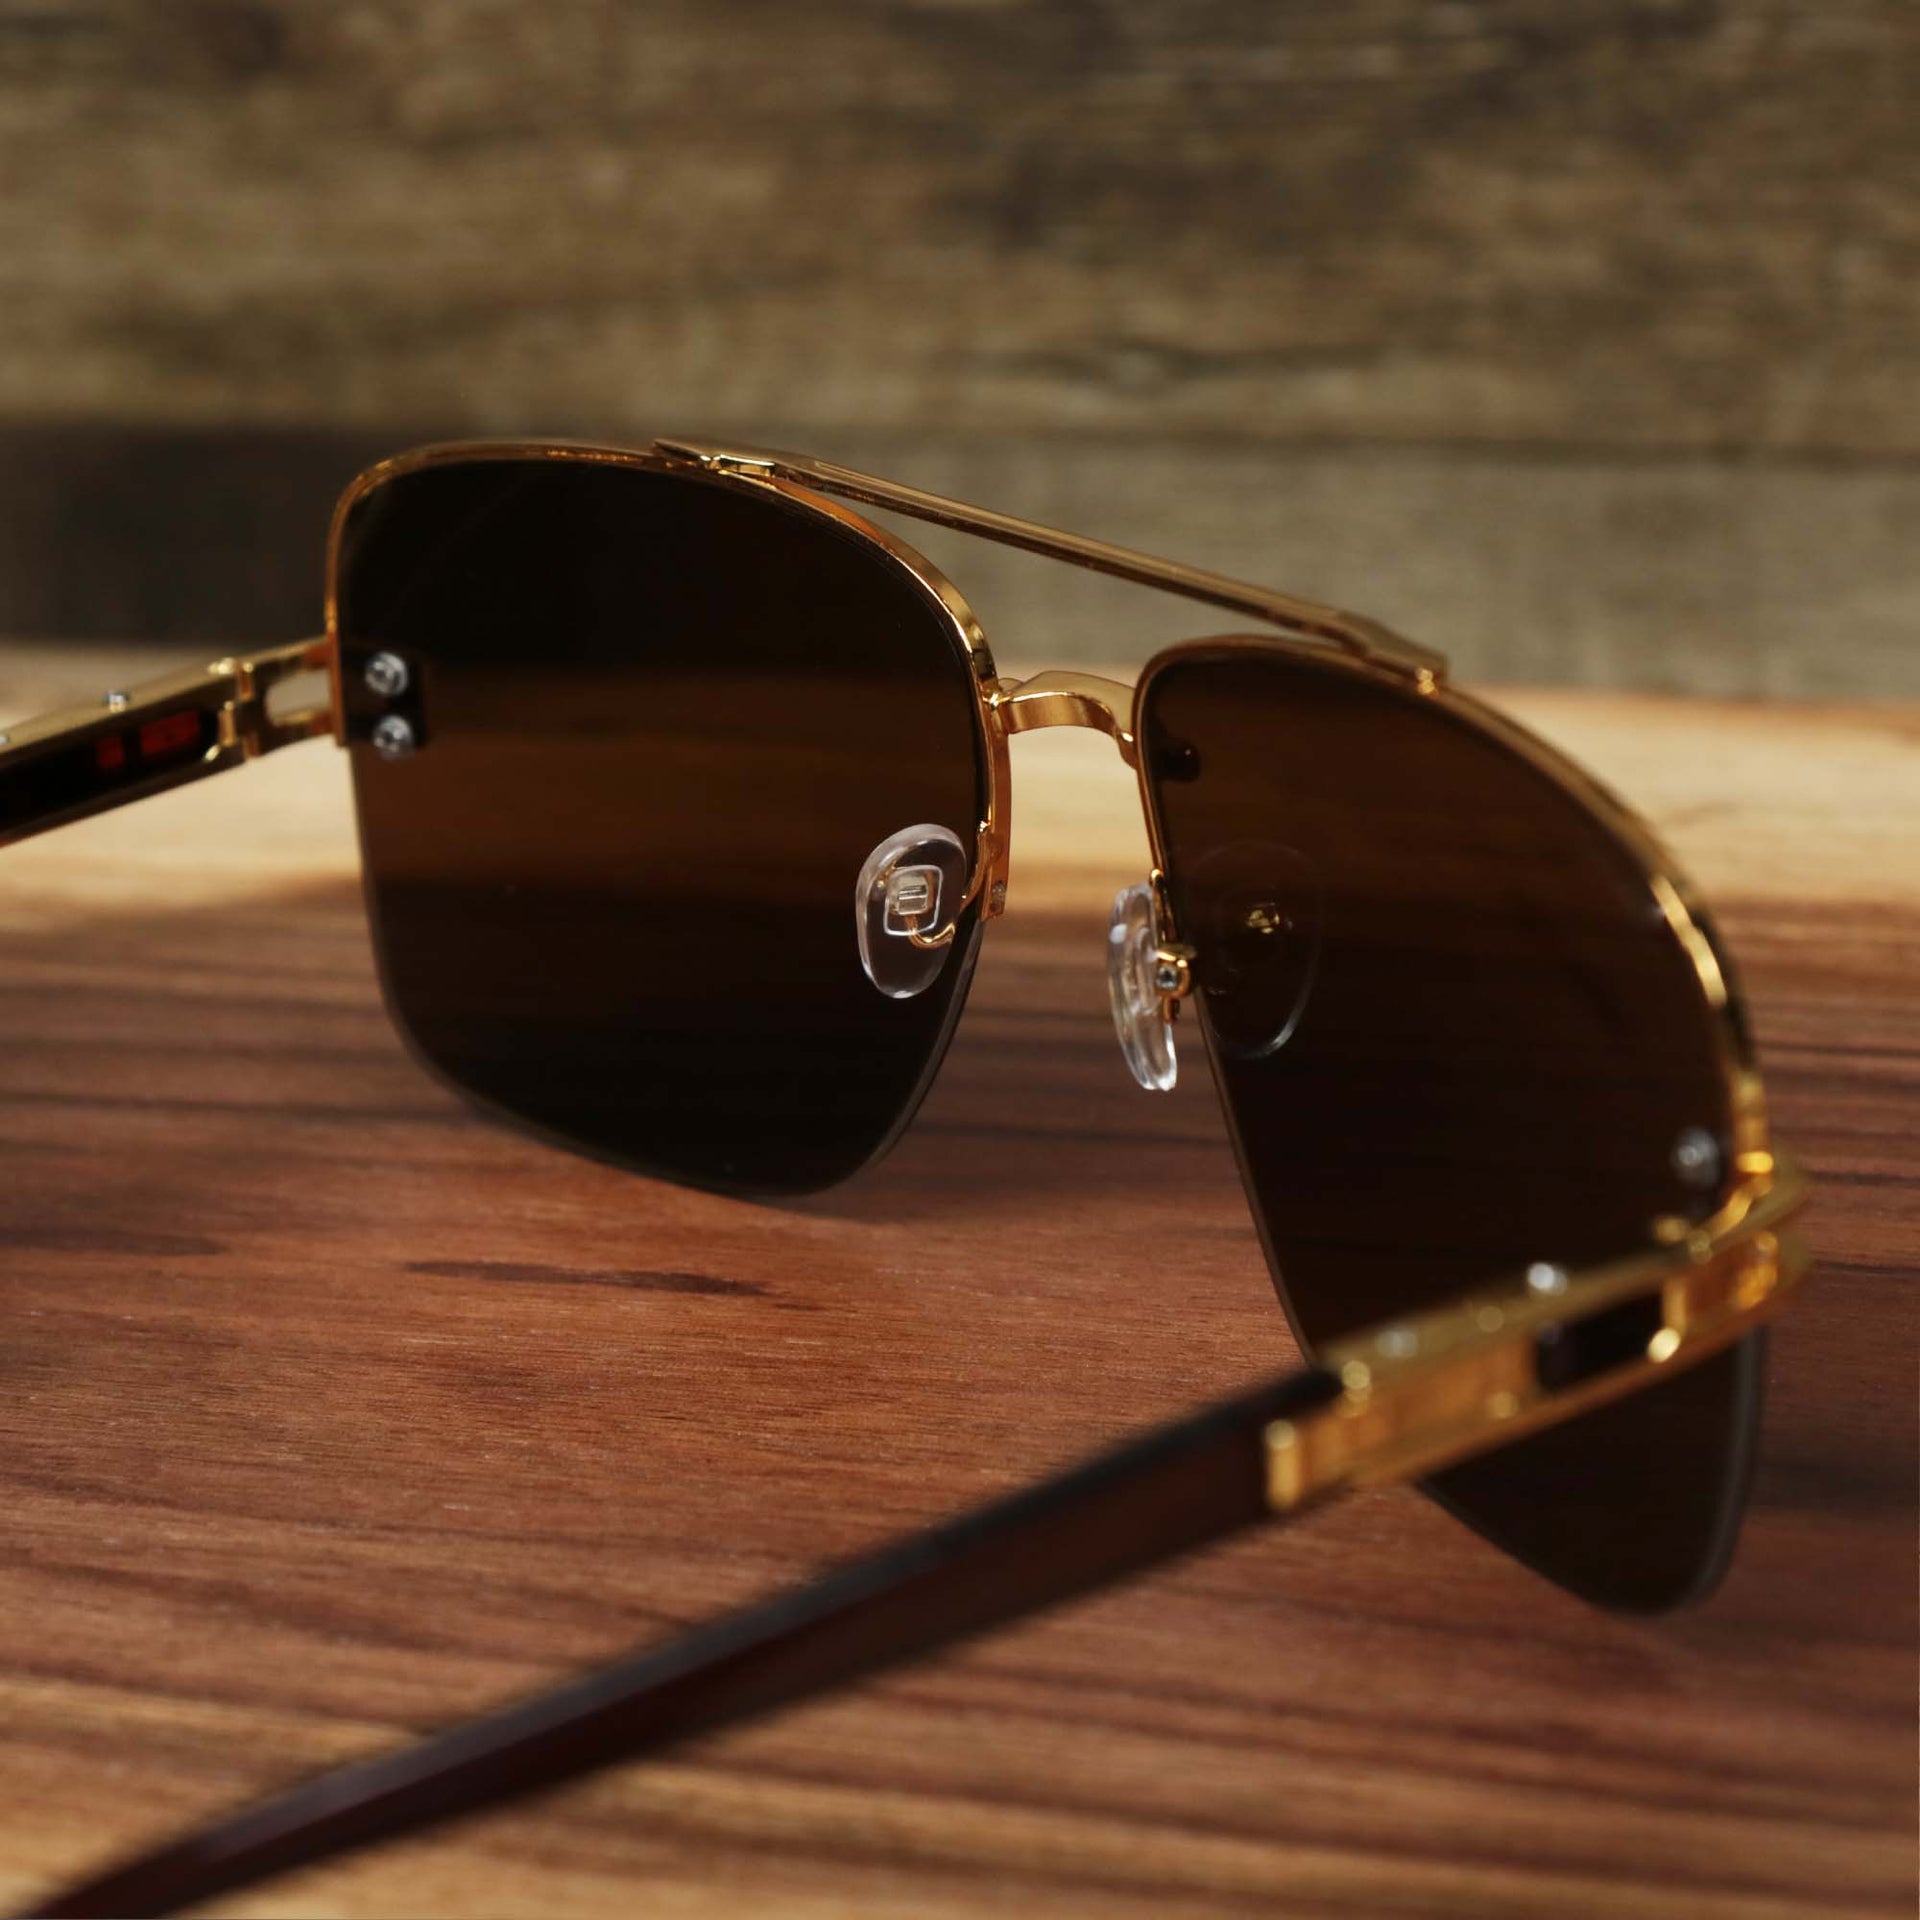 The inside of the Round Rectangle Frame Black Lens Sunglasses with Gold Frame